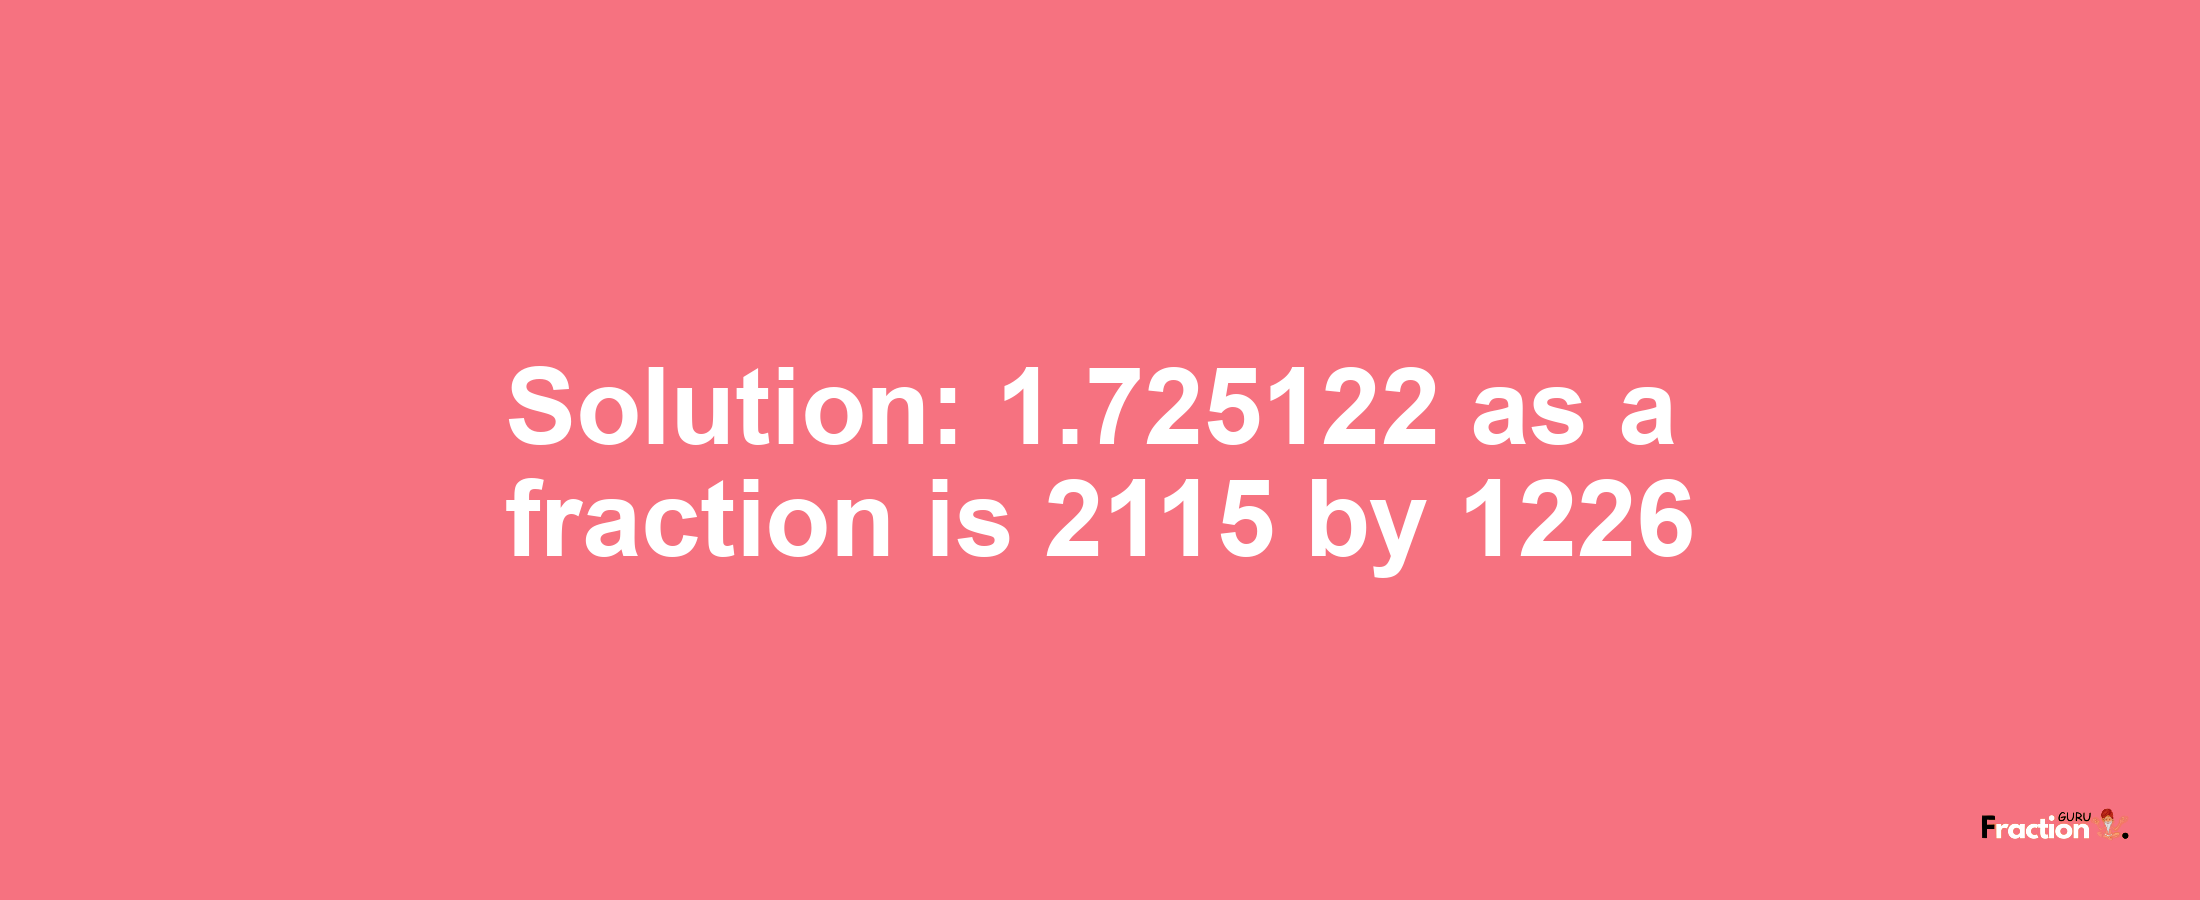 Solution:1.725122 as a fraction is 2115/1226